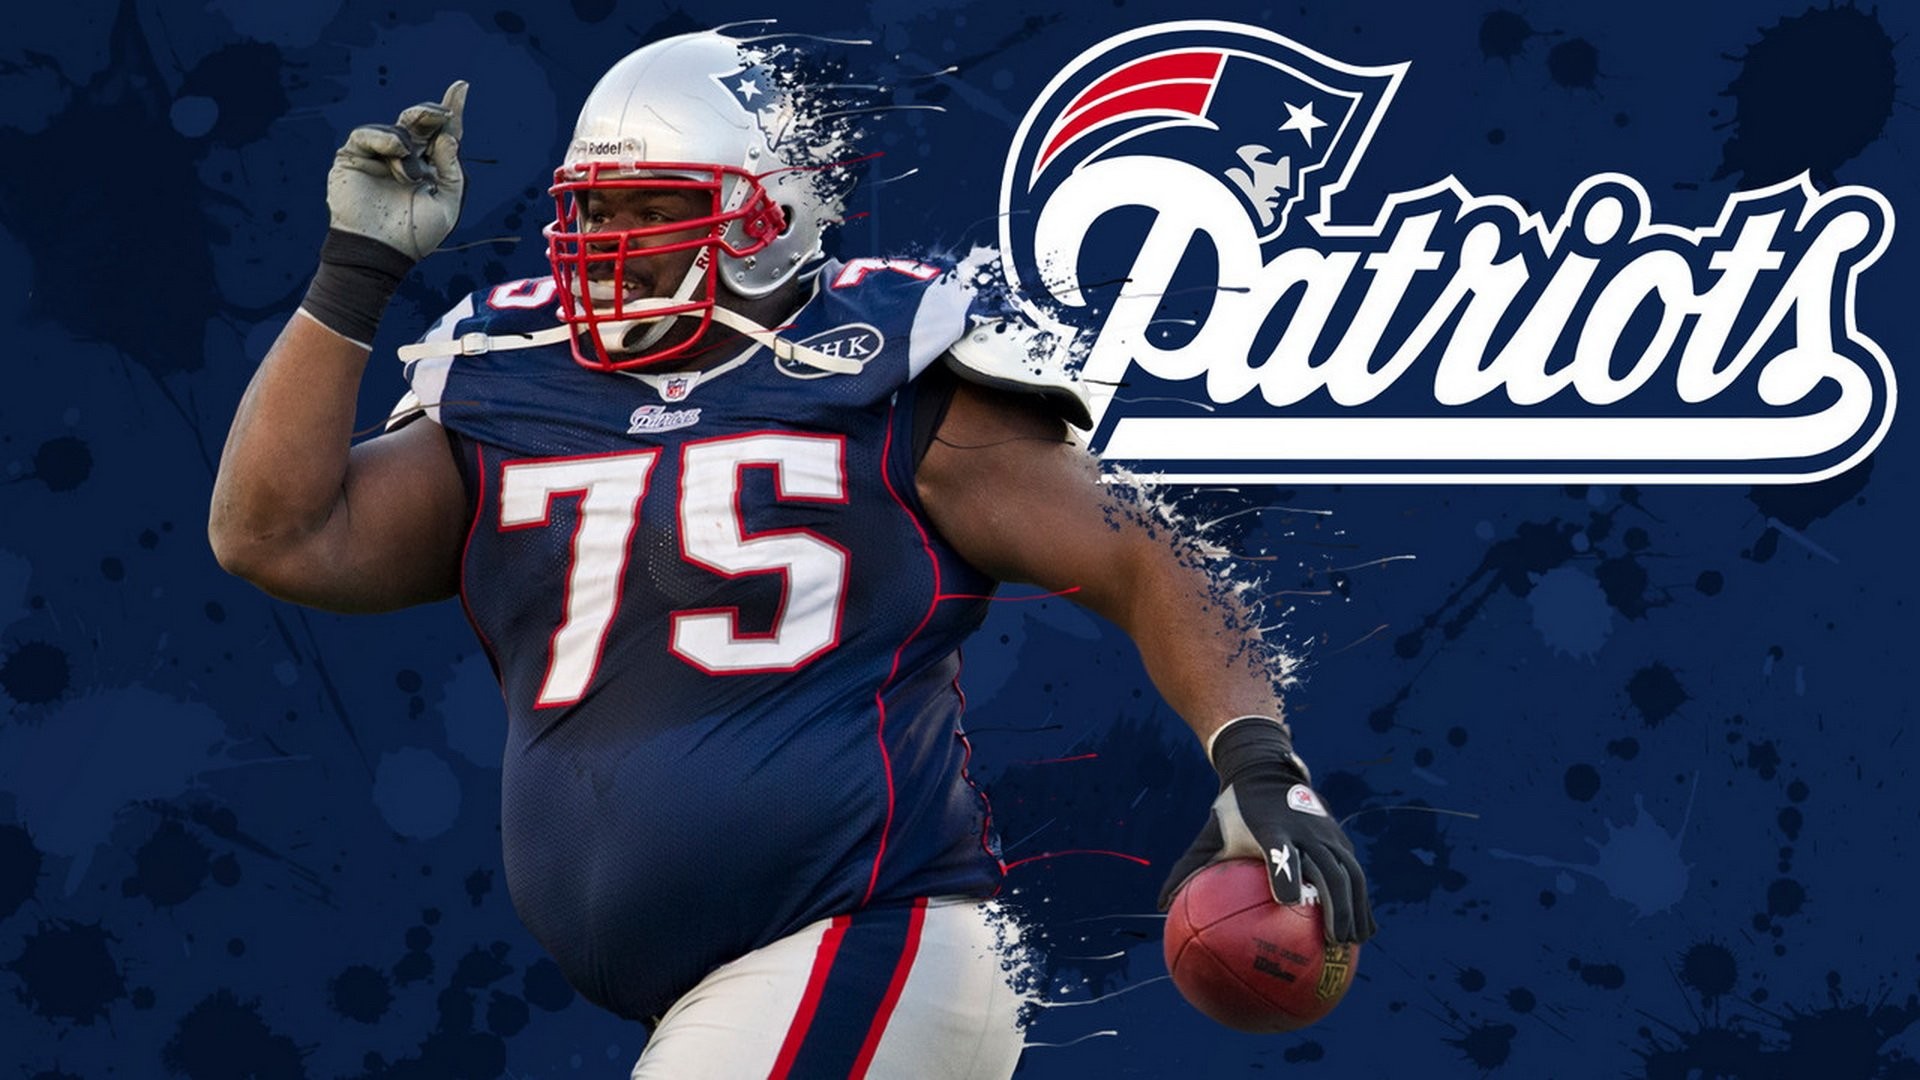 Patriots Backgrounds HD With Resolution 1920X1080 pixel. You can make this wallpaper for your Mac or Windows Desktop Background, iPhone, Android or Tablet and another Smartphone device for free